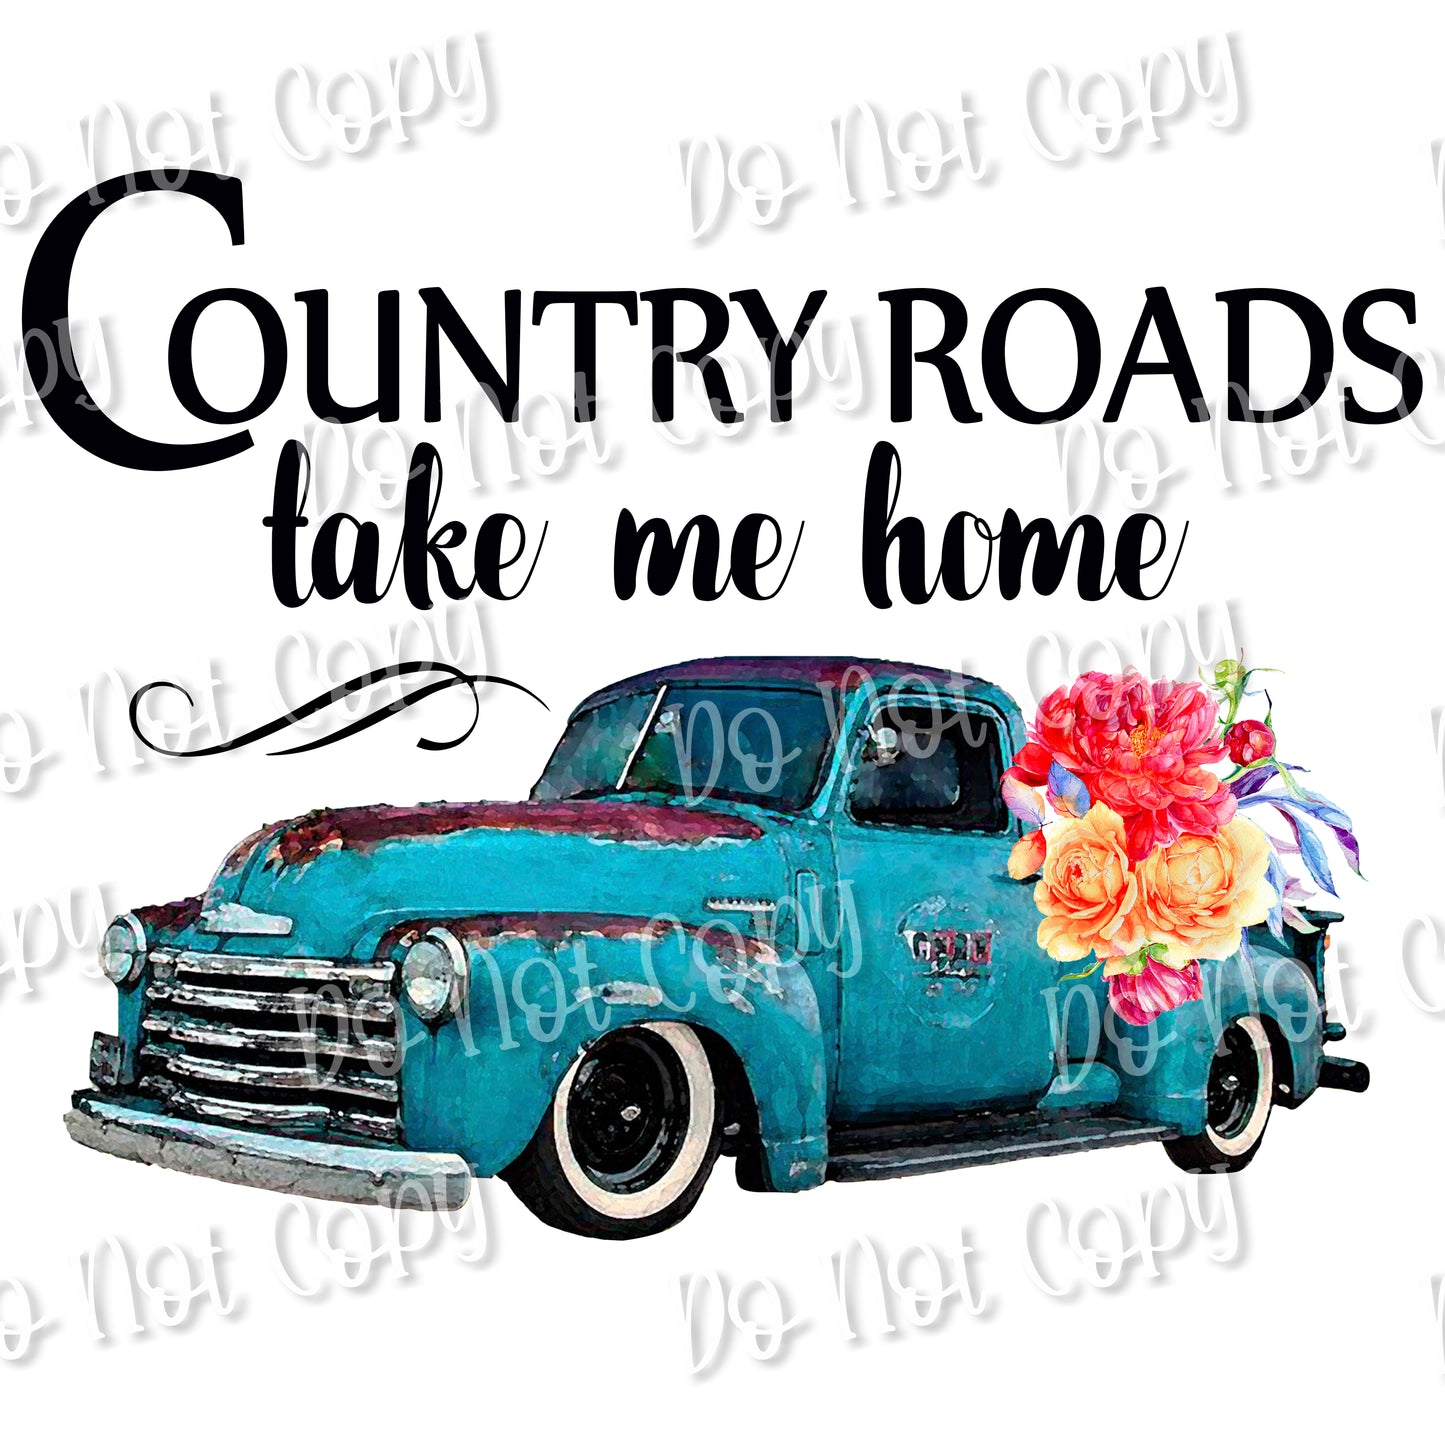 Country Roads Take me Home 2 Sublimation Print